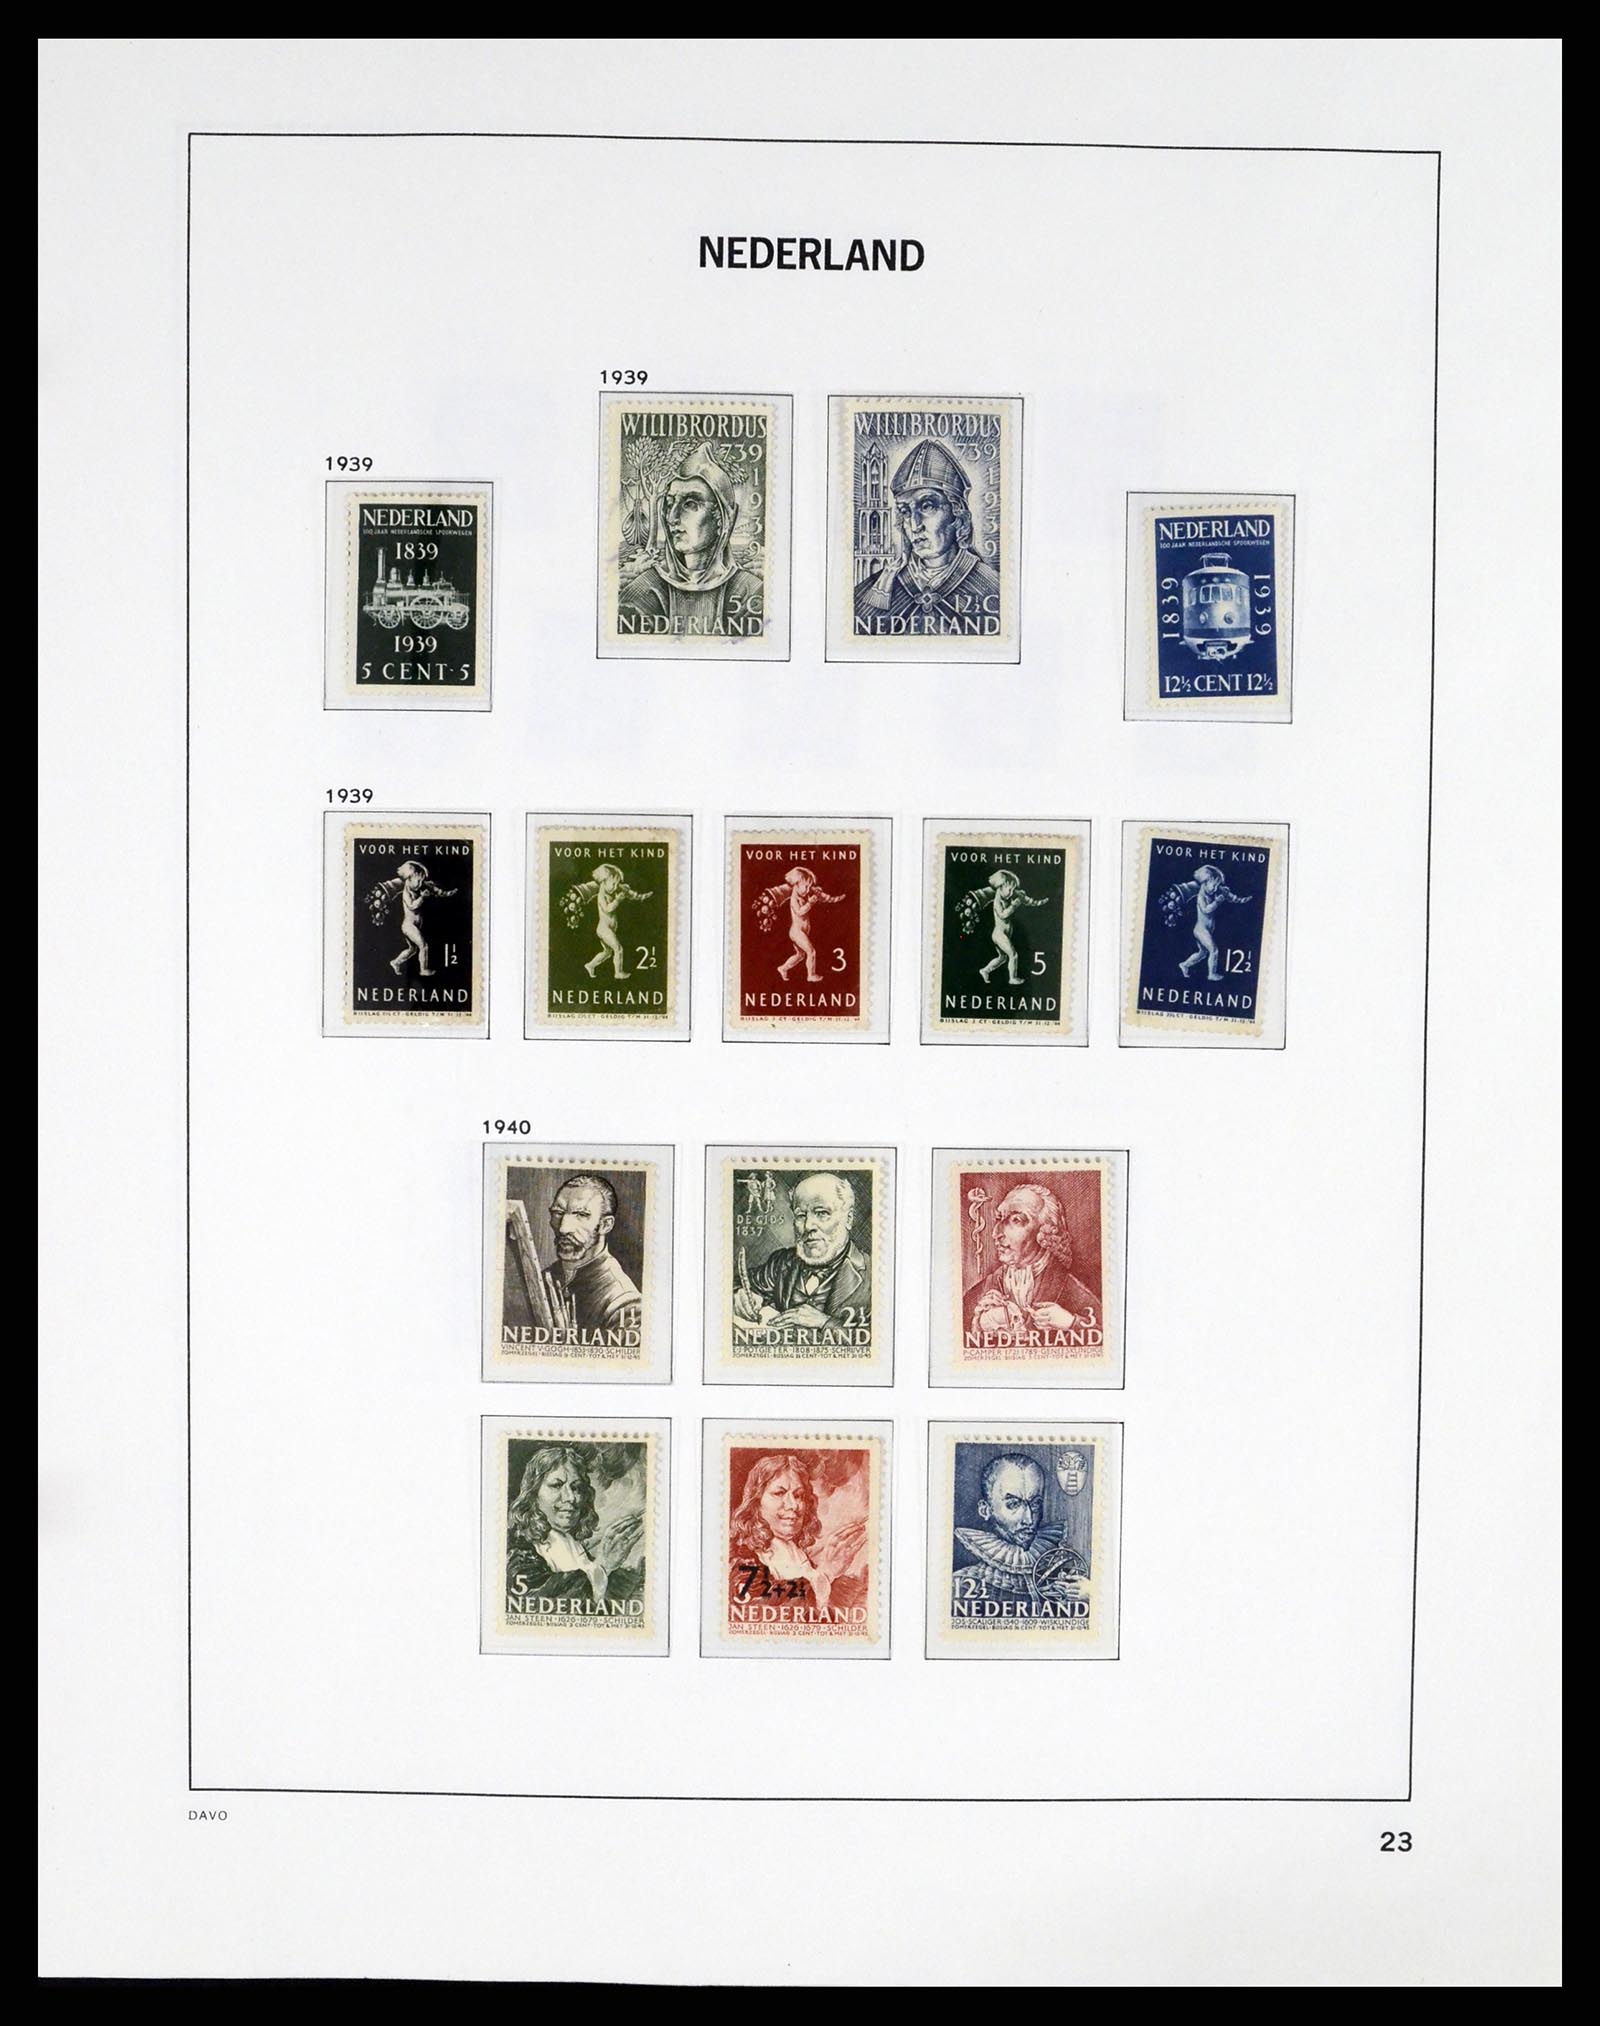 37294 023 - Stamp collection 37294 Netherlands 1852-2001.